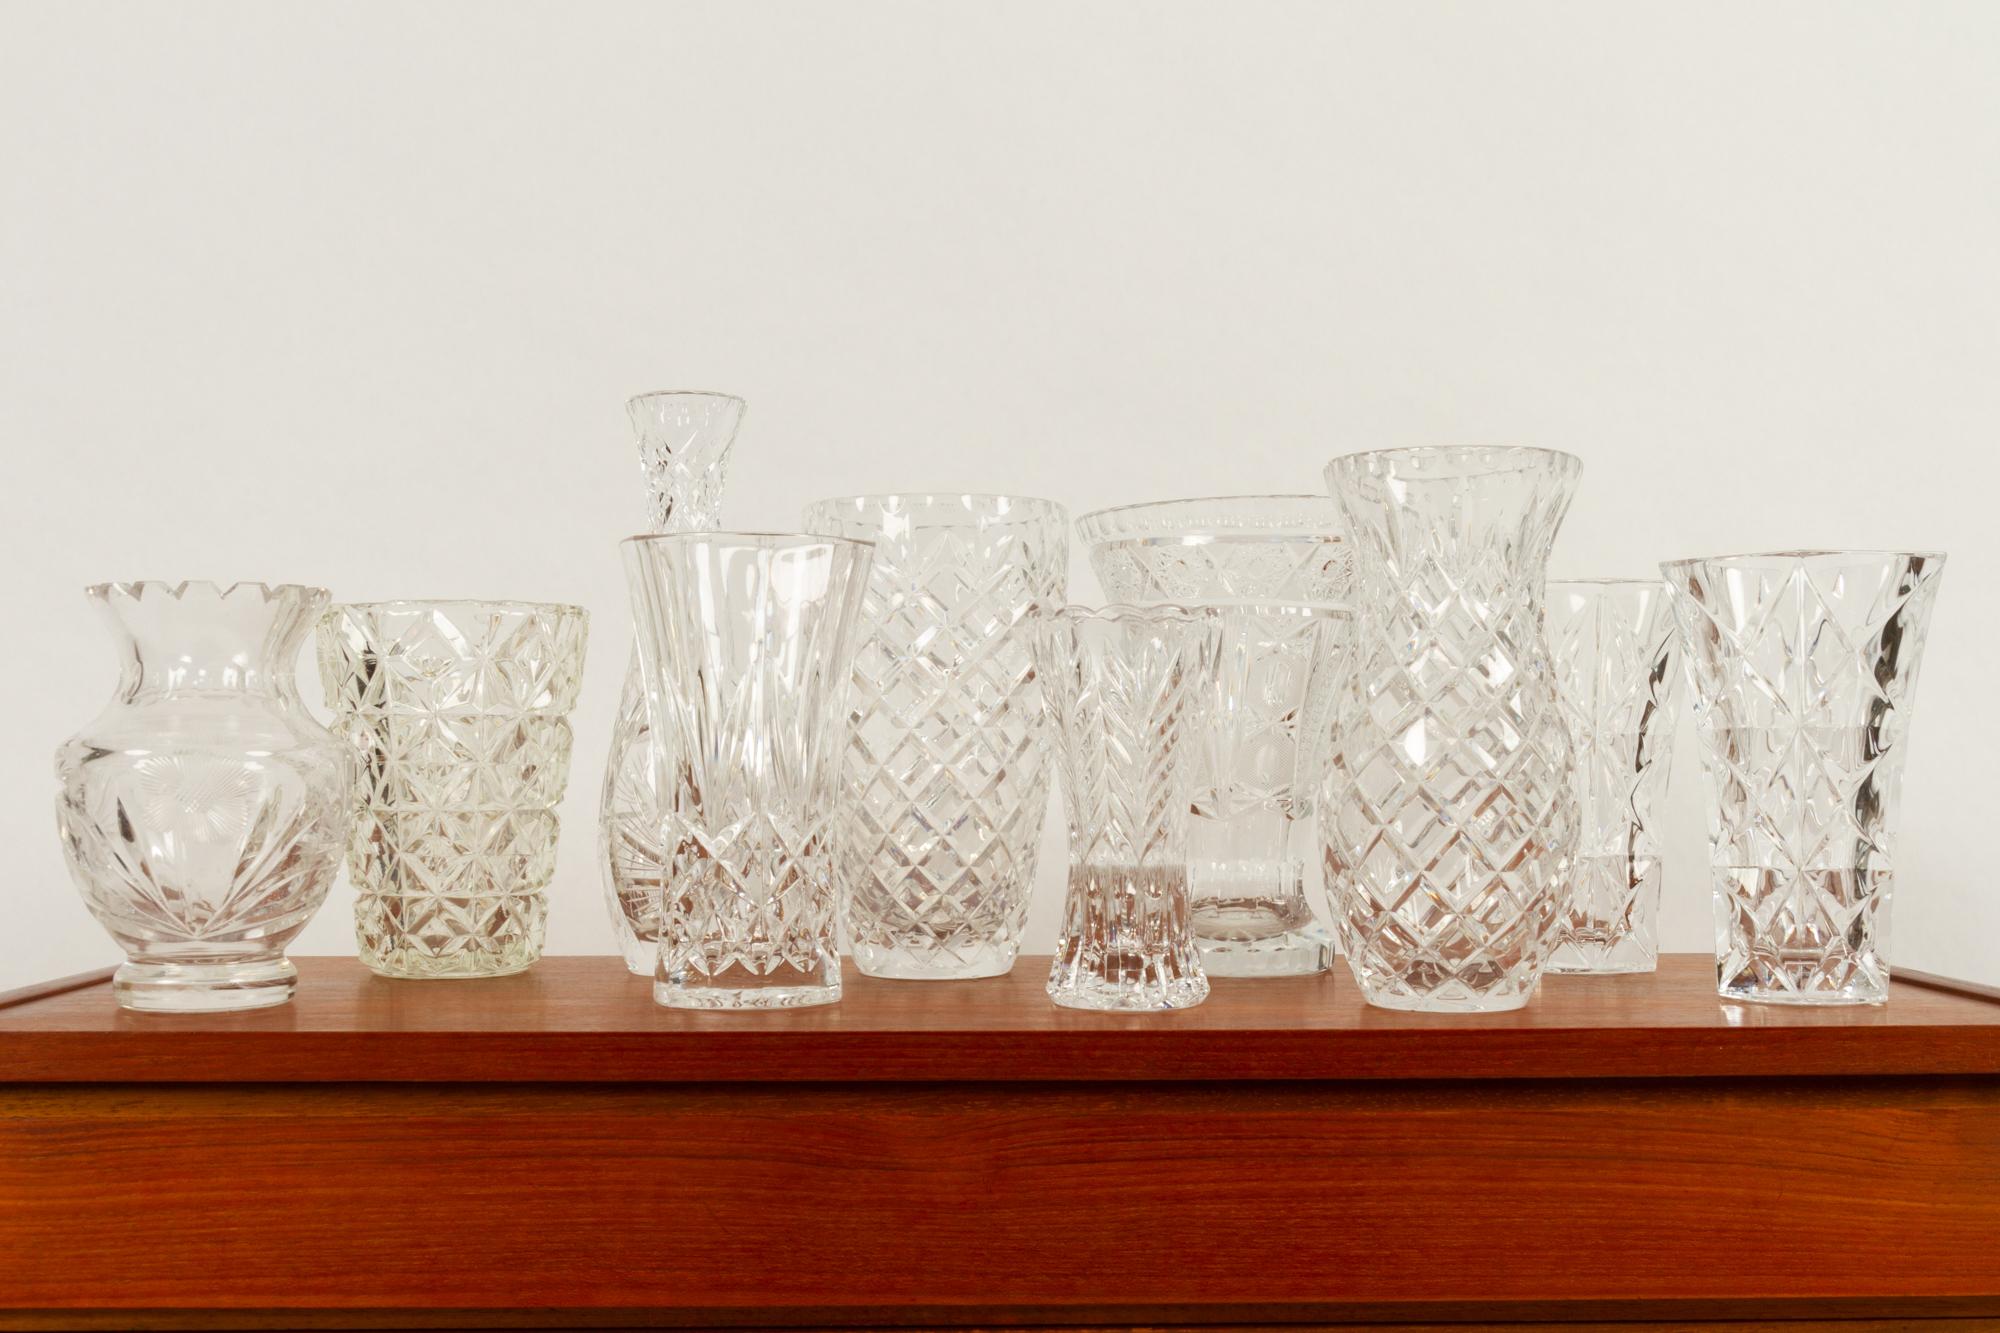 Antique Bohemian lead crystal vases set of 10.
Set of ten different antique cut crystal vases, with different cut decorations, first half of the 20th century. Size: Height 15 - 26cm.
With good weight, no damage, chips or cracks.